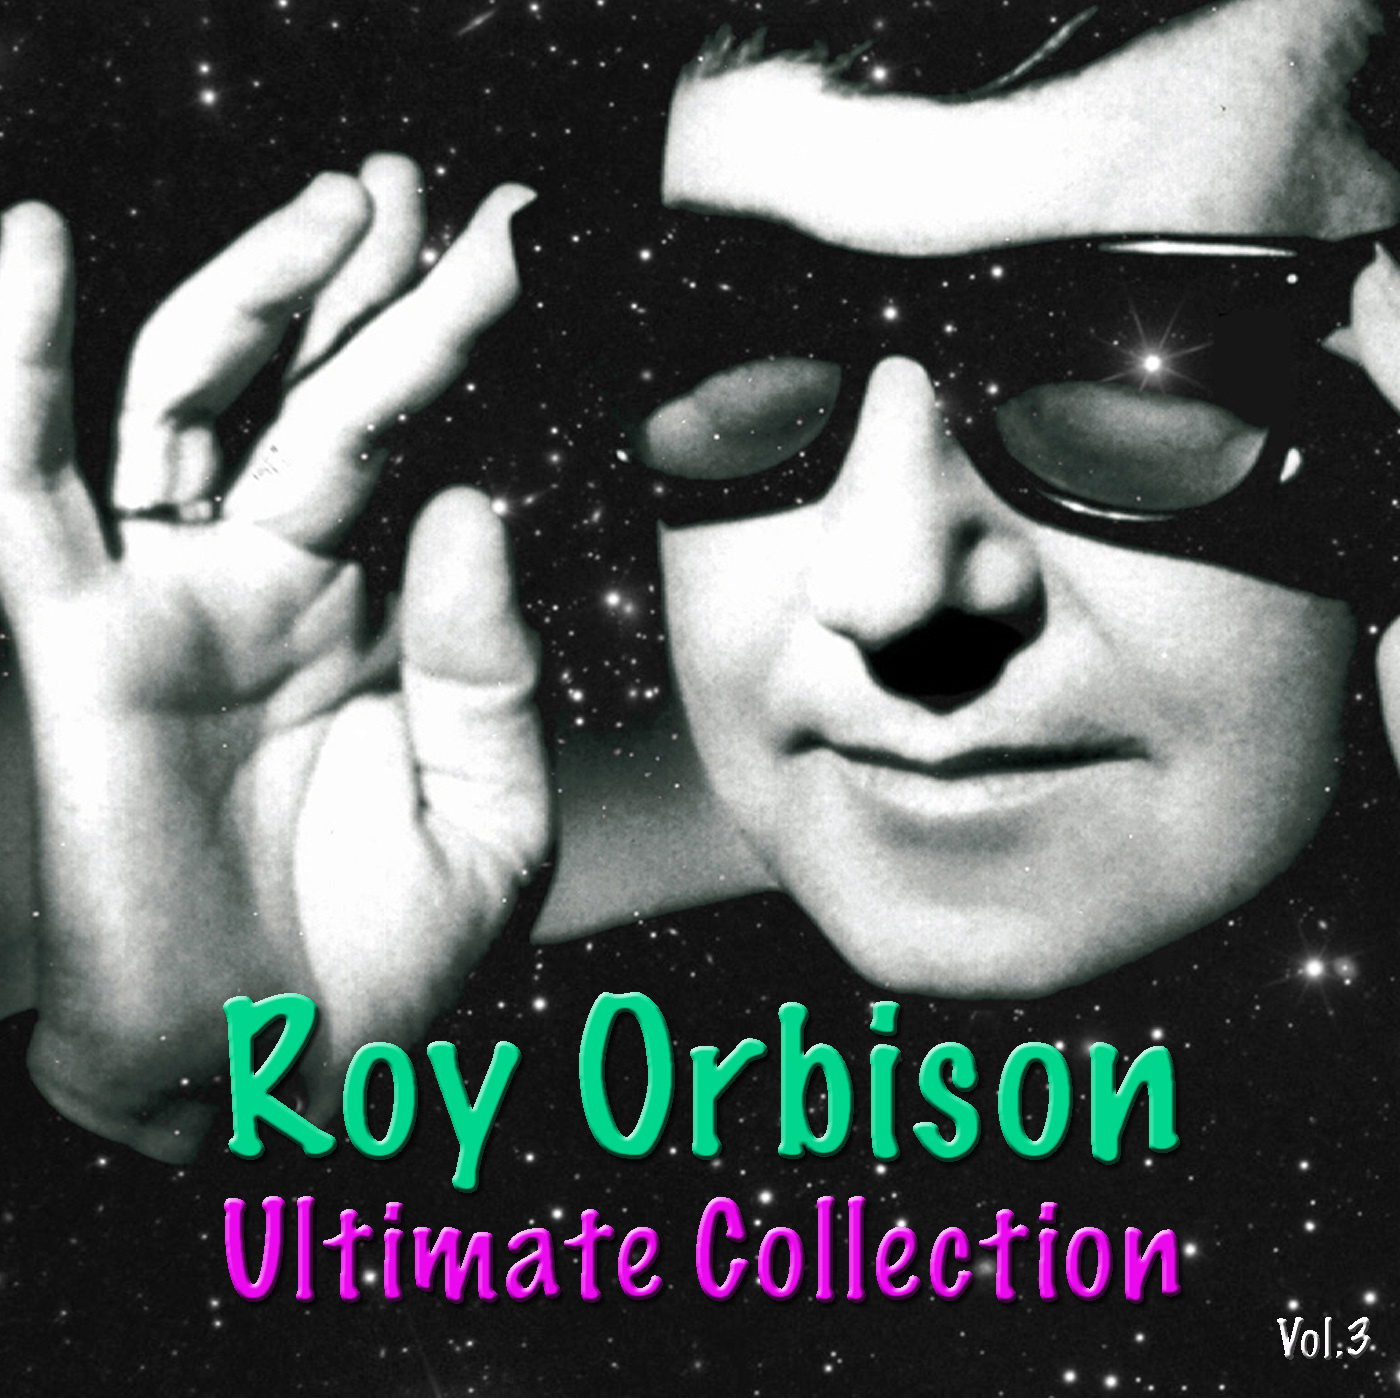 Roy Orbison, Ultimate Collection Vol. 3